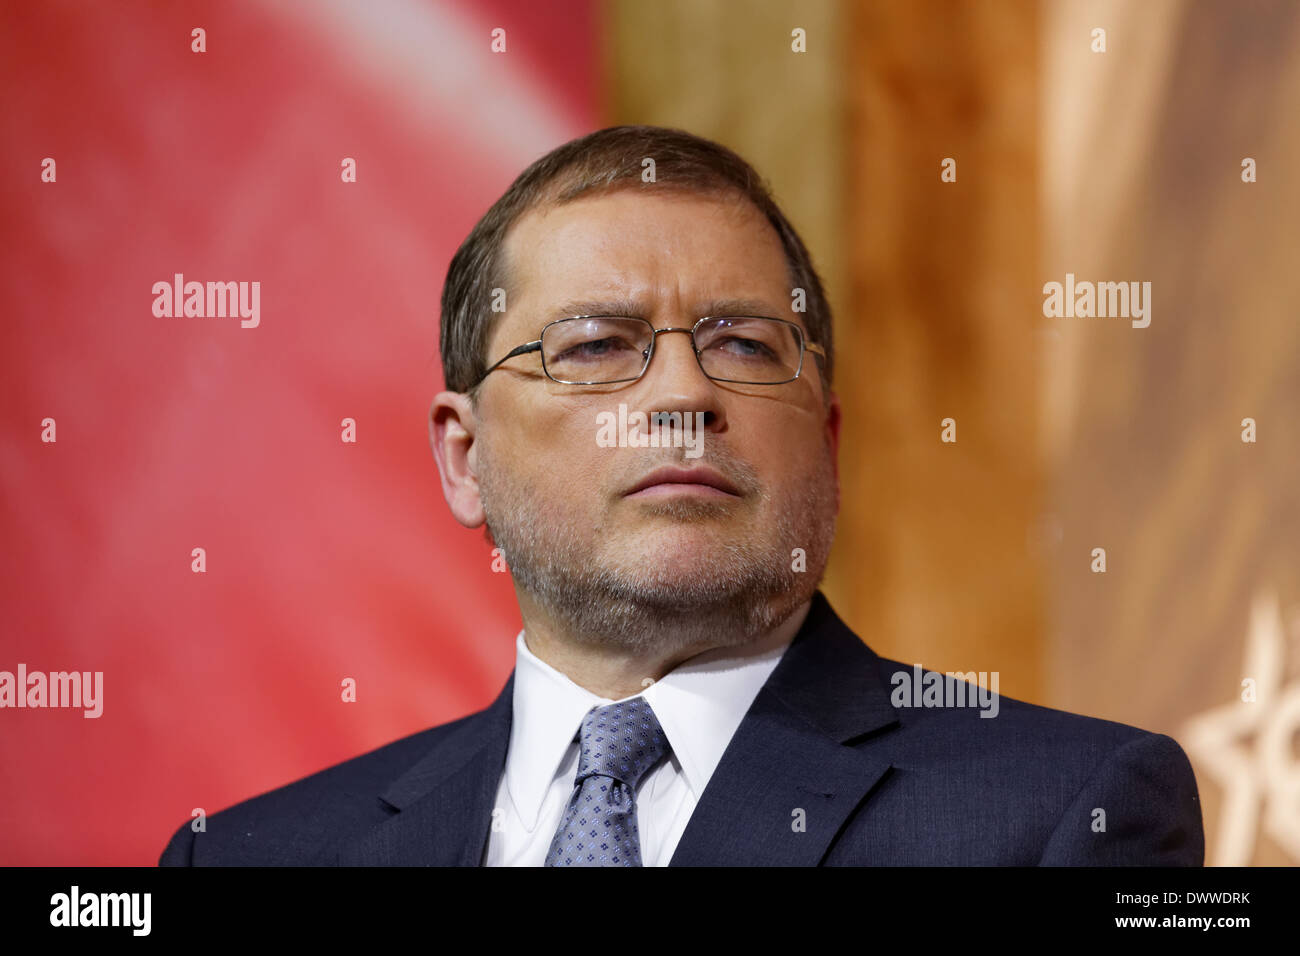 Republican figure and anti-tax campaigner Grover Norquist pictured at the 2014 CPAC conference in National Harbor, Maryland. Stock Photo